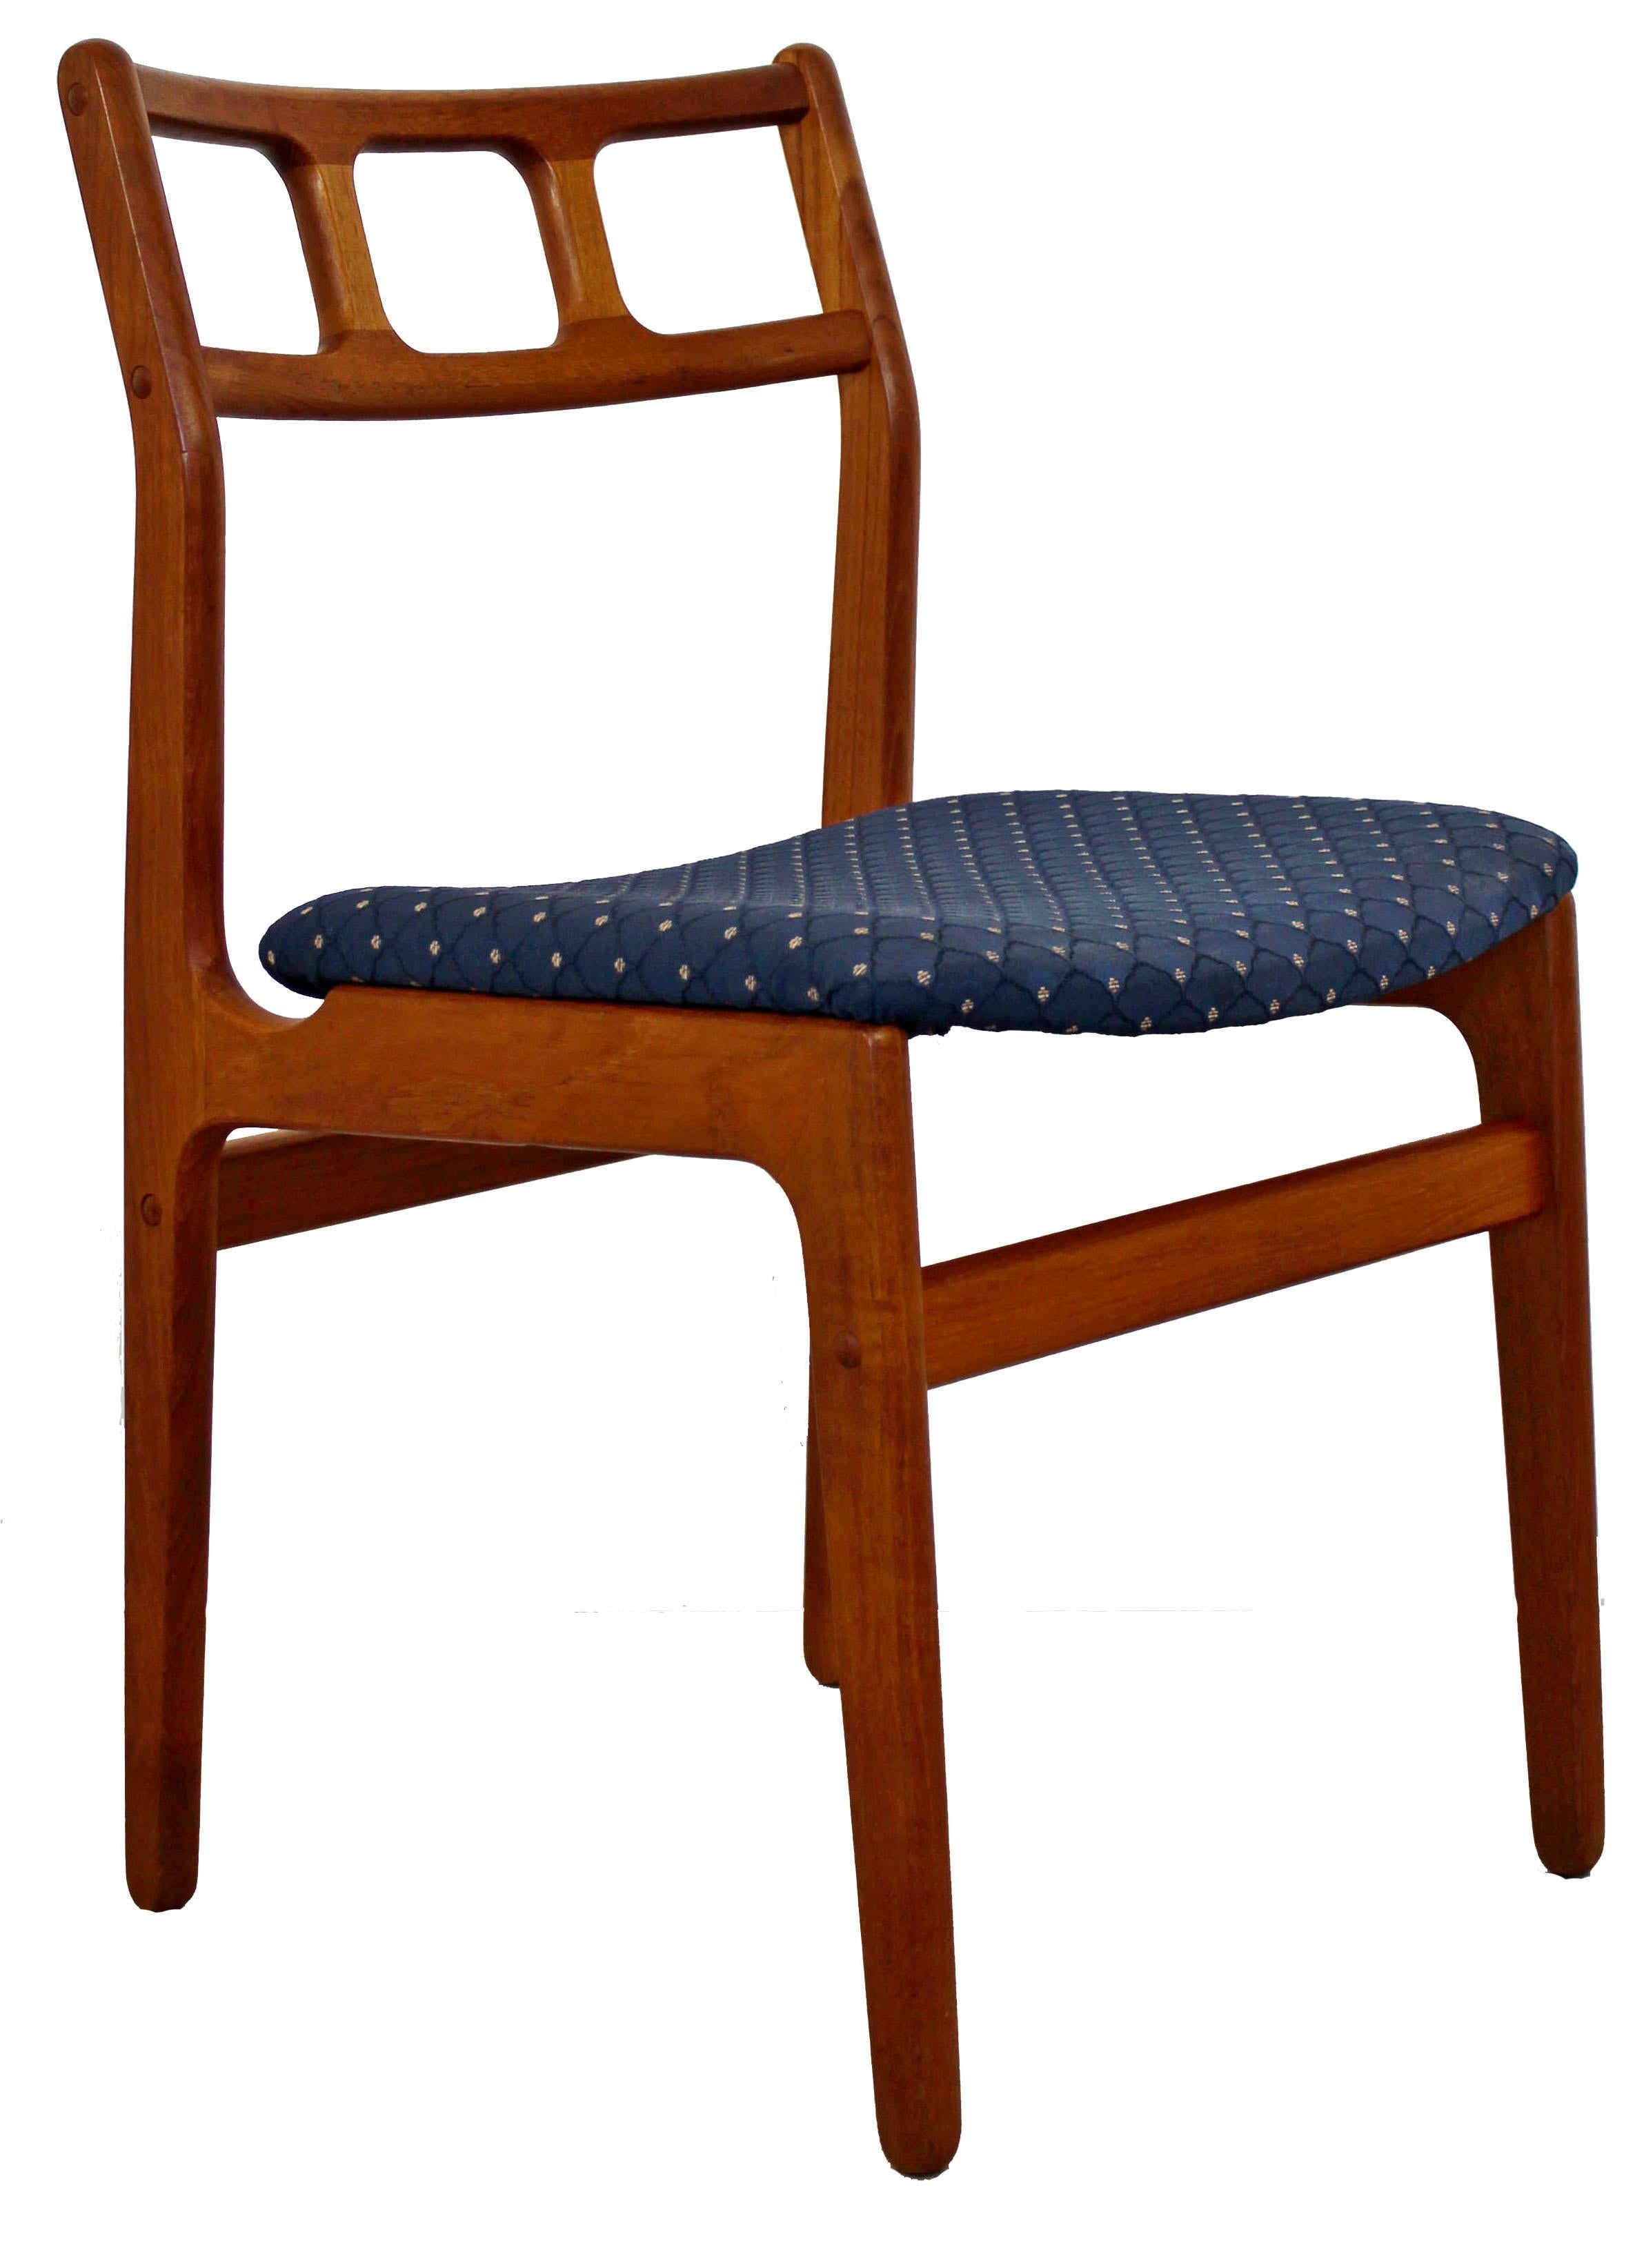 For your consideration is a stunning set of eight, Danish teak side dining chairs, by D-Scan, circa the 1960s. In excellent vintage condition. The dimensions are 18